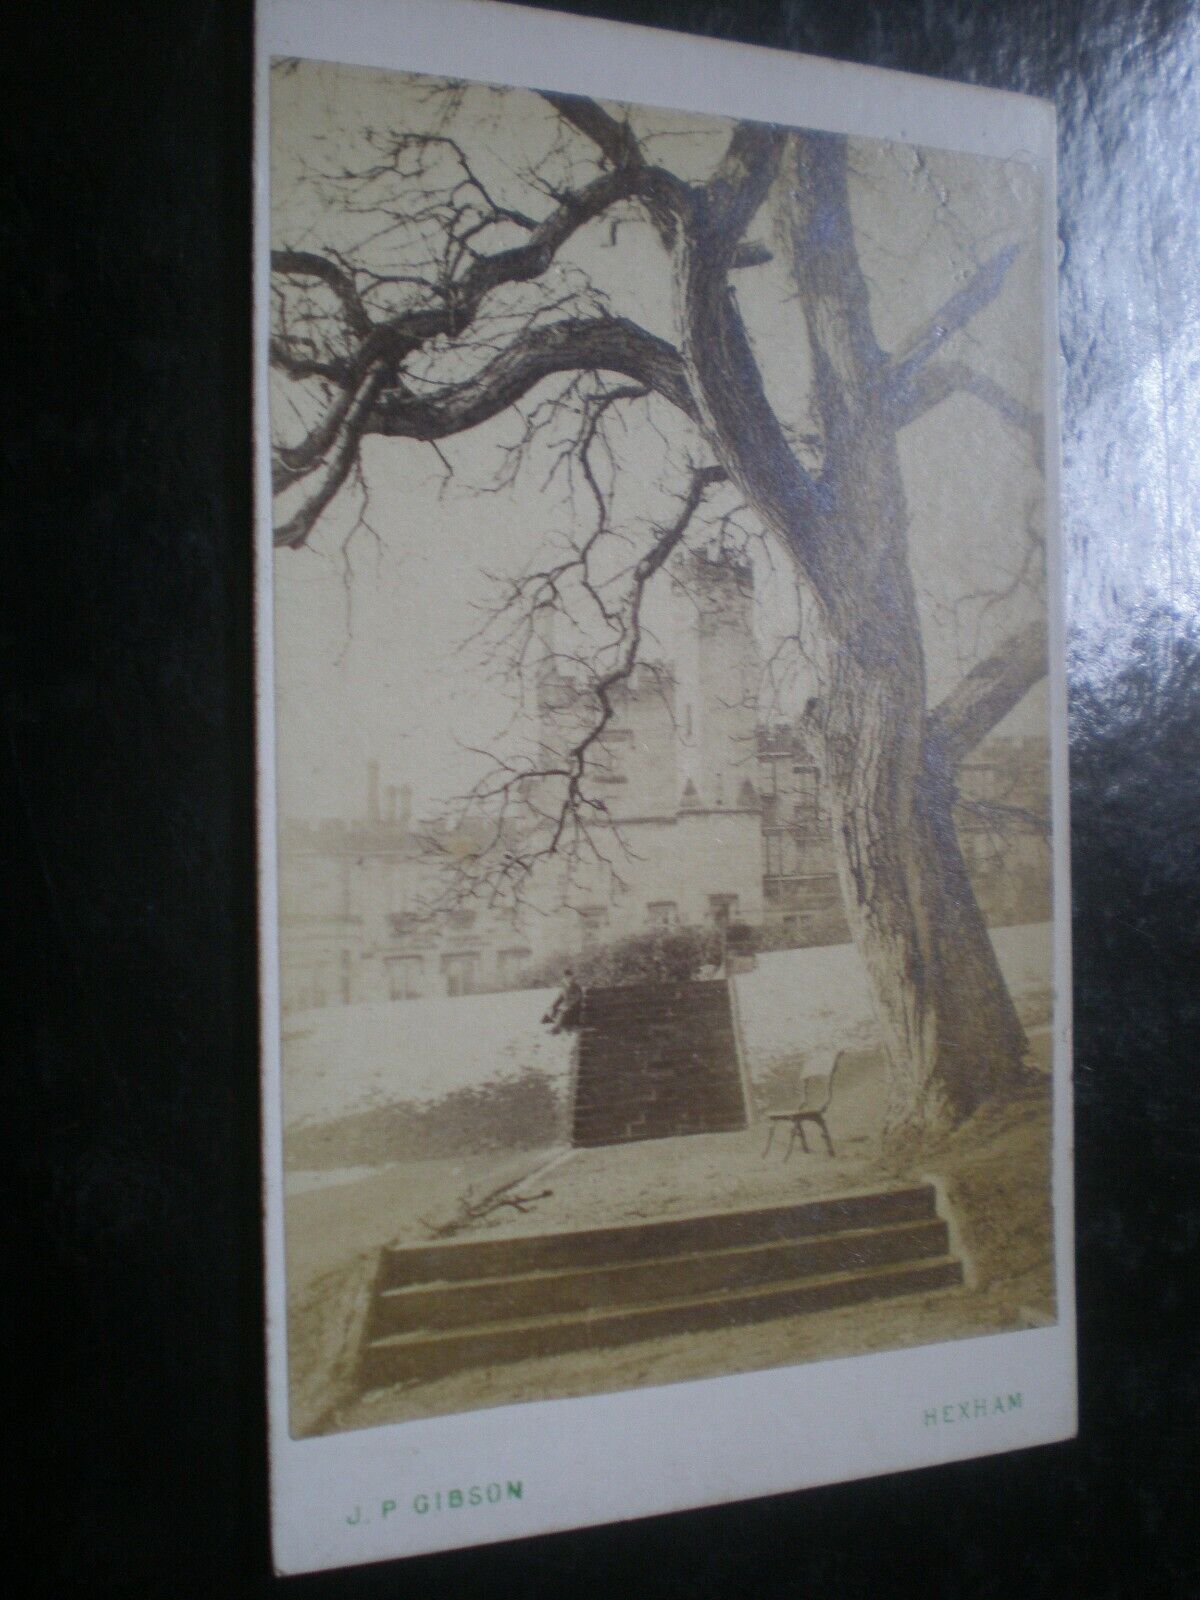 Cdv old photograph Beaufort Castle by Gibson at Hexham c1860s